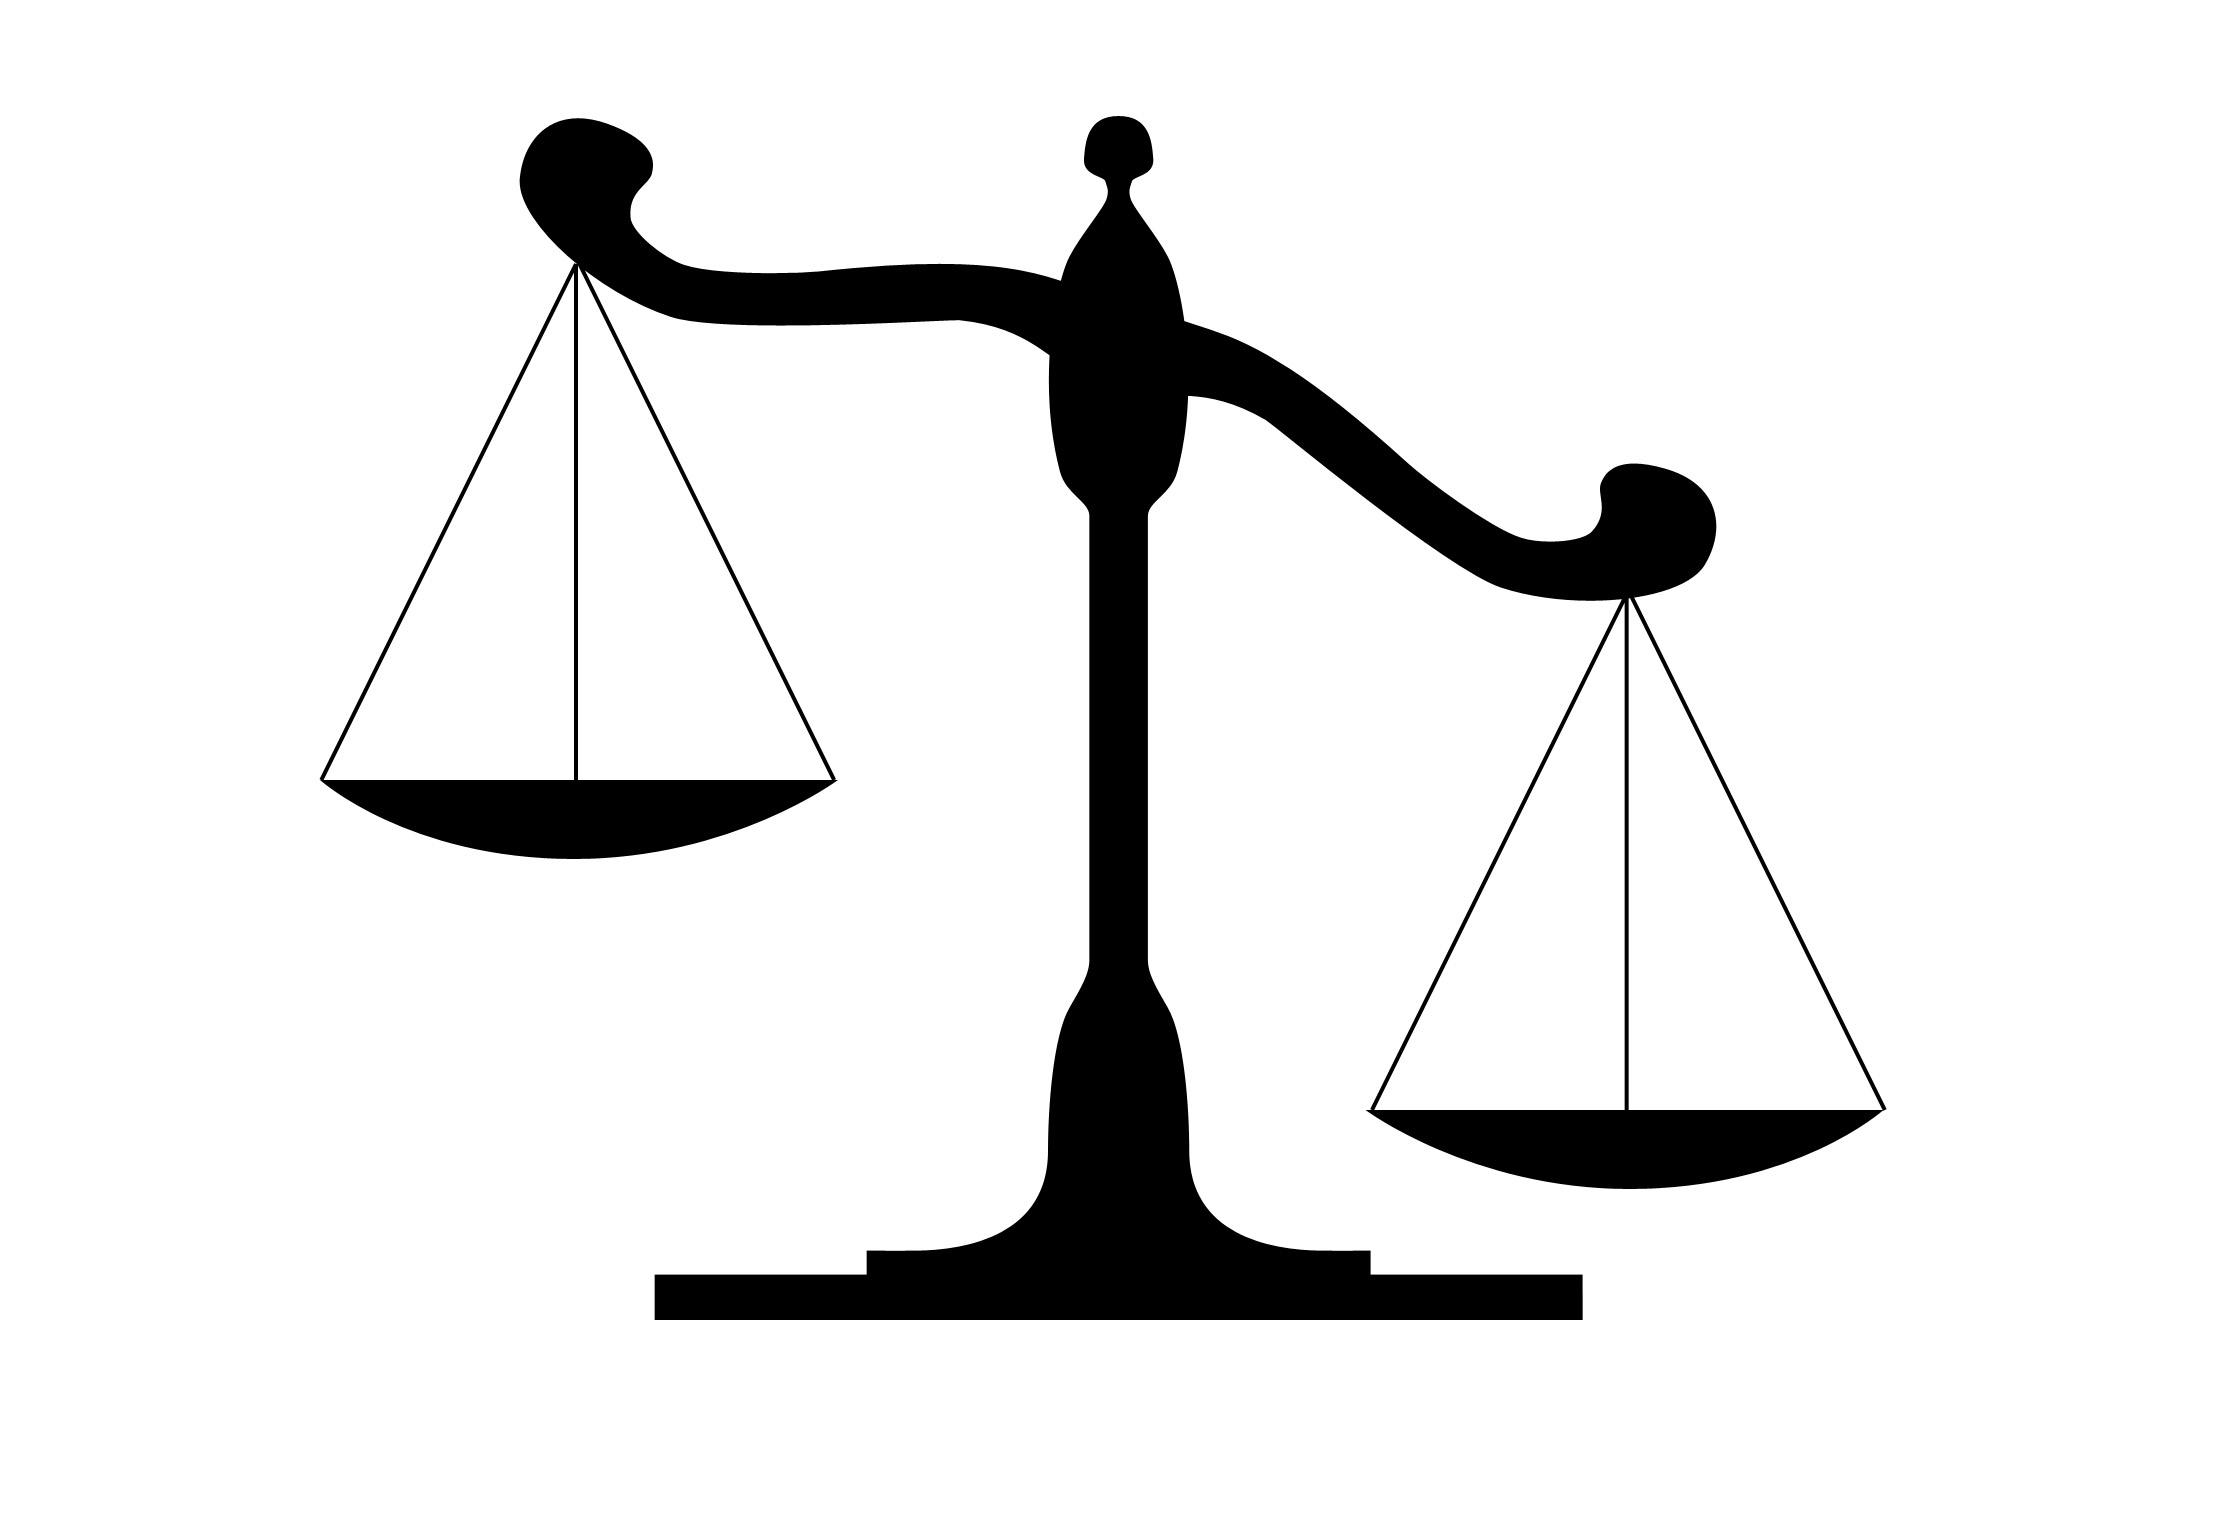 Picture Of A Balance Scale - ClipArt Best